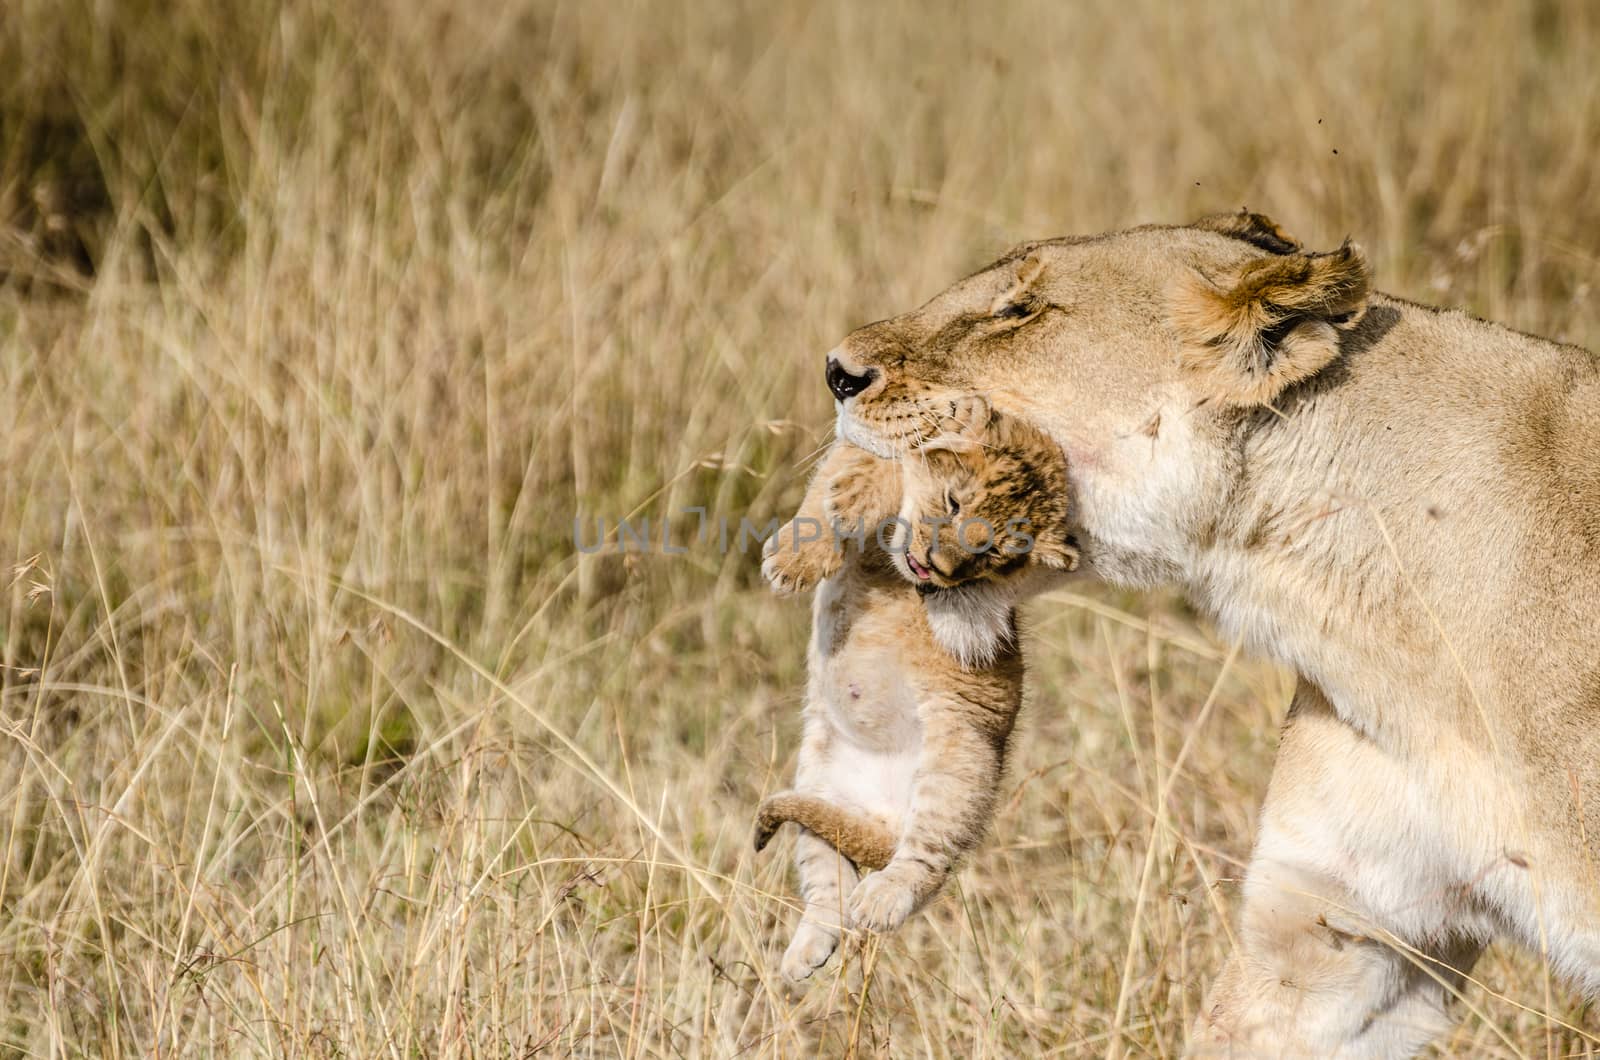 Wild lioness with her 1 week old cub in the mouth, bringim him in a new hiding place